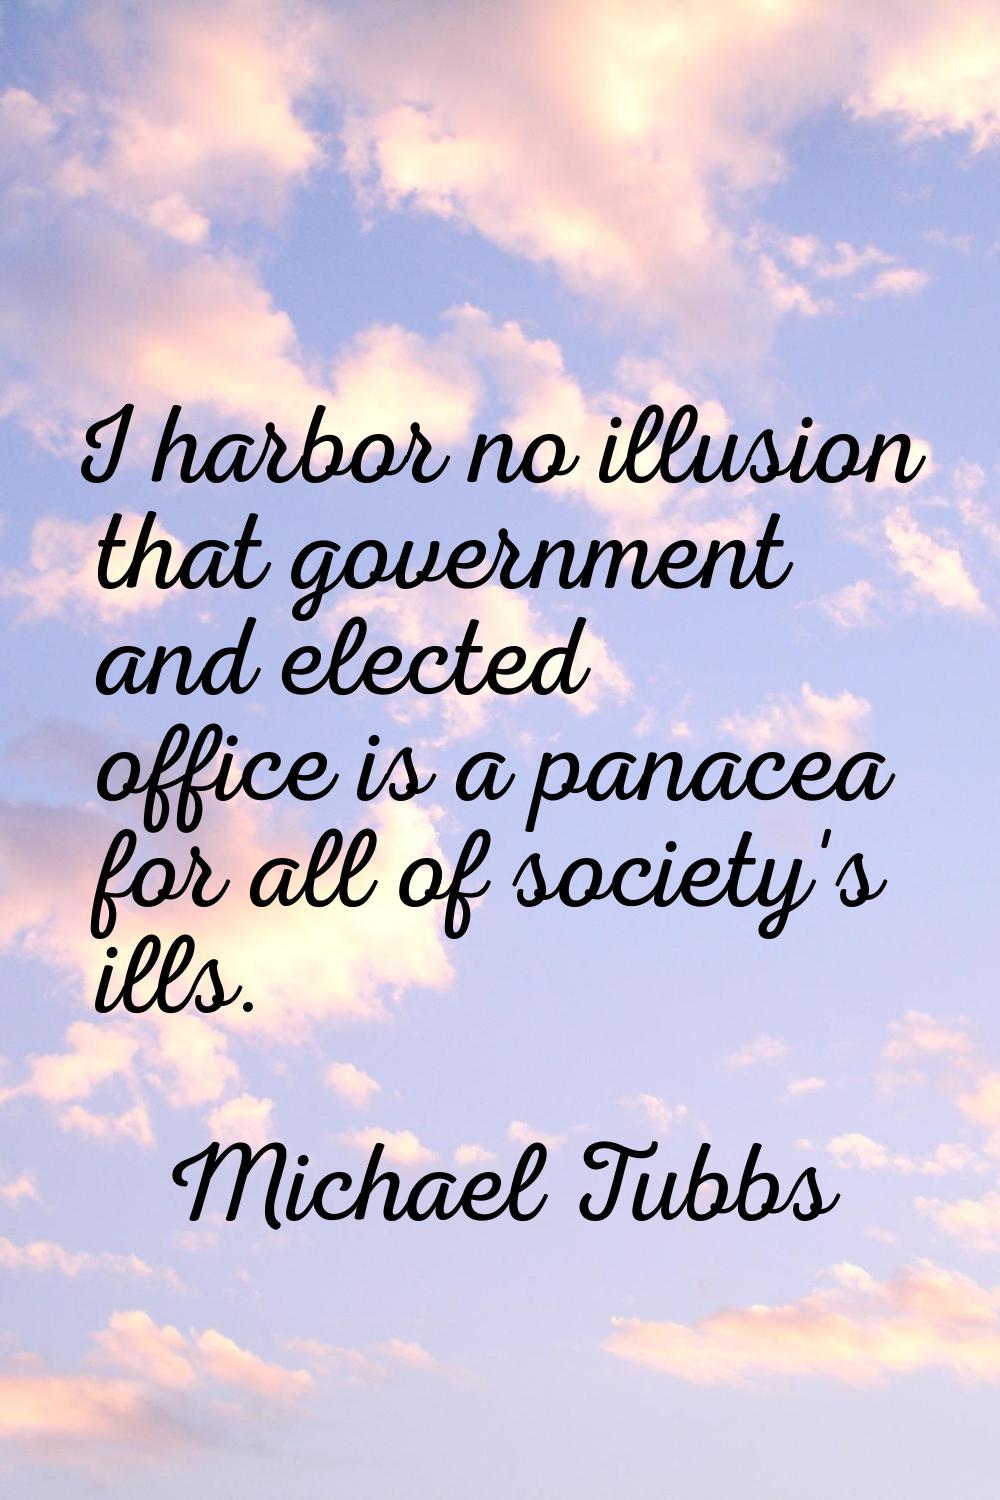 I harbor no illusion that government and elected office is a panacea for all of society's ills.